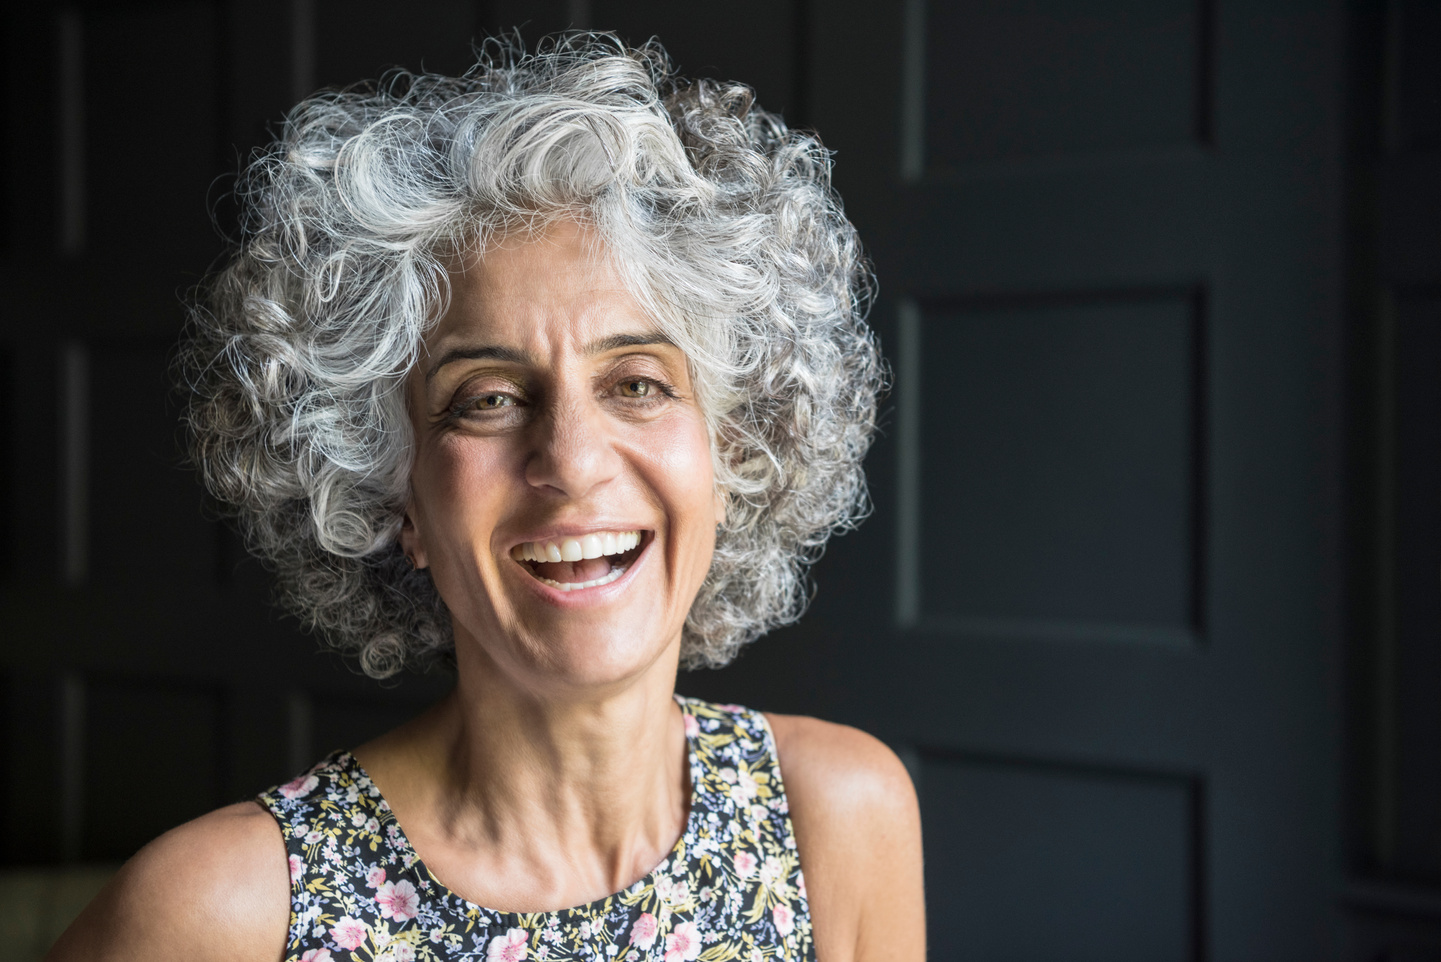 Mature woman with grey curly hair laughing